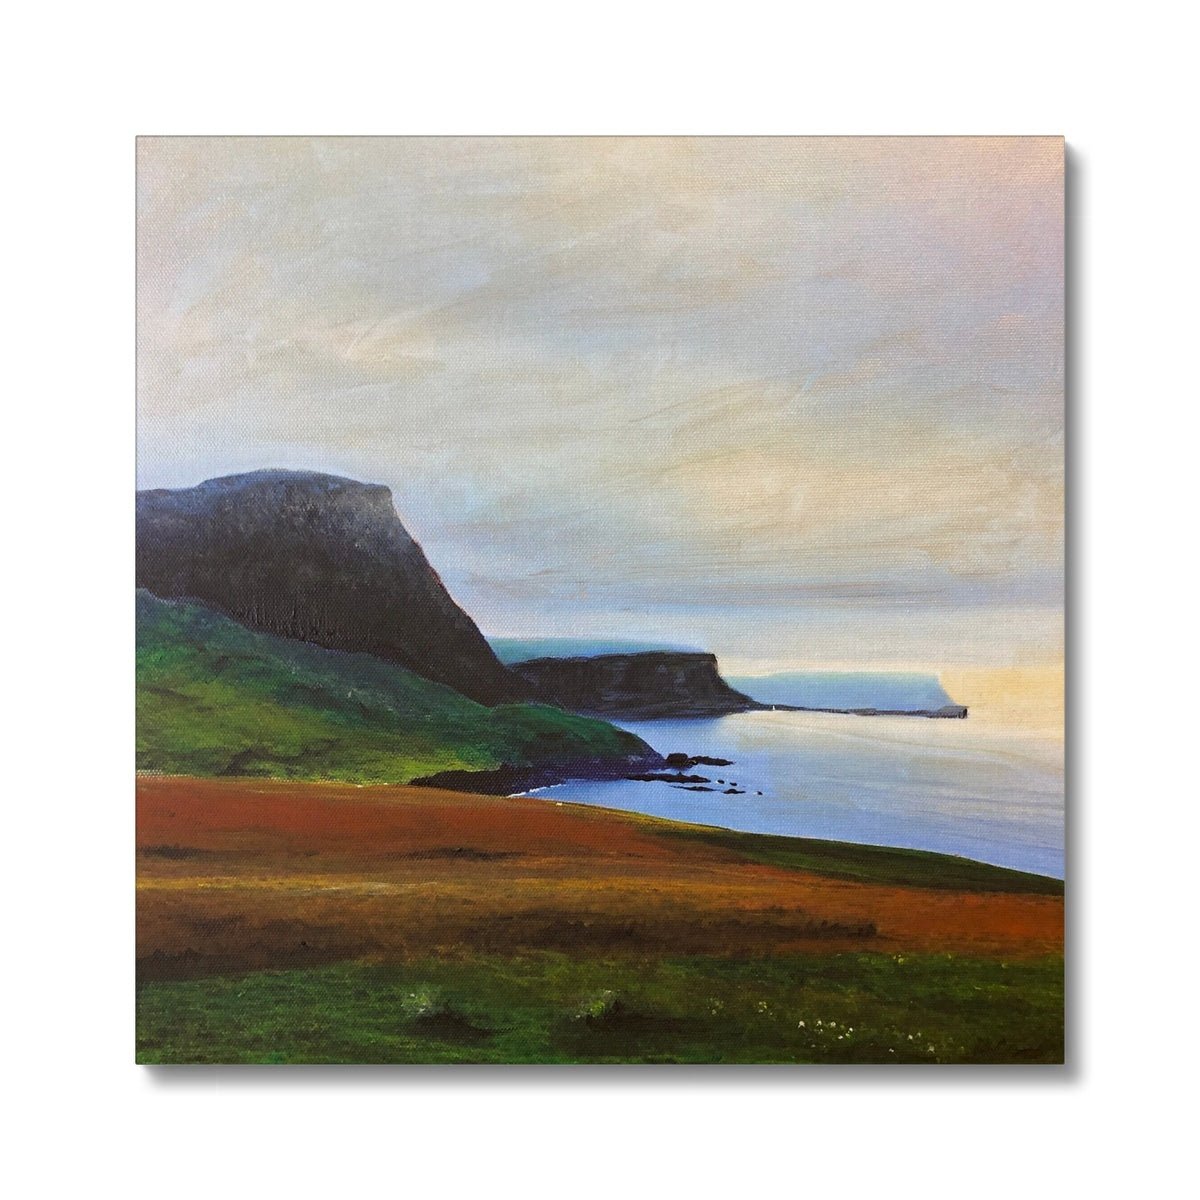 Neist Point Cliffs Skye Painting | Canvas From Scotland-Contemporary Stretched Canvas Prints-Skye Art Gallery-24"x24"-Paintings, Prints, Homeware, Art Gifts From Scotland By Scottish Artist Kevin Hunter